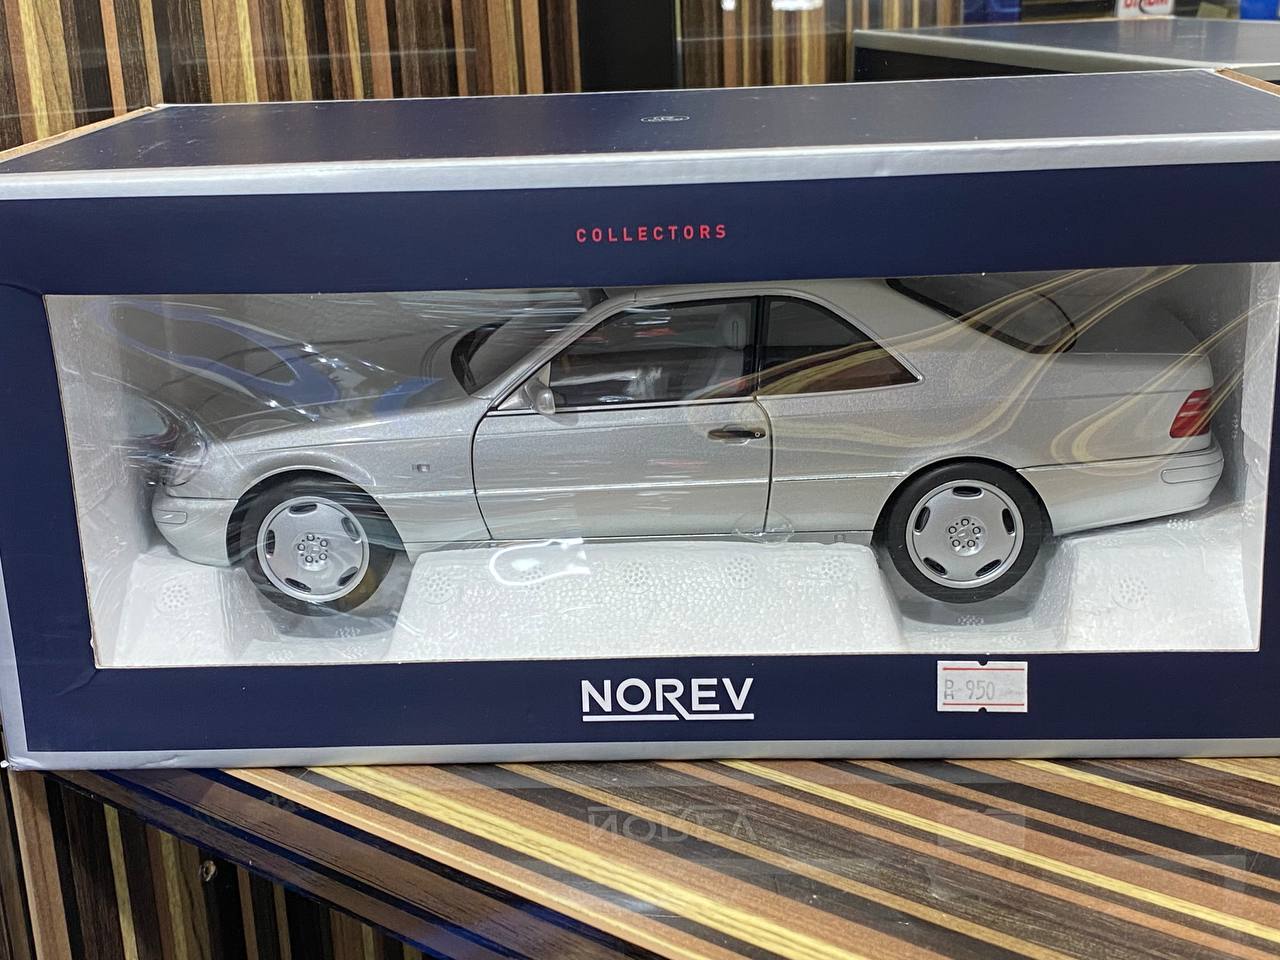 1/18 Diecast Mercedes-Benz CL600 Coupe Silver Norev Scale Model Car